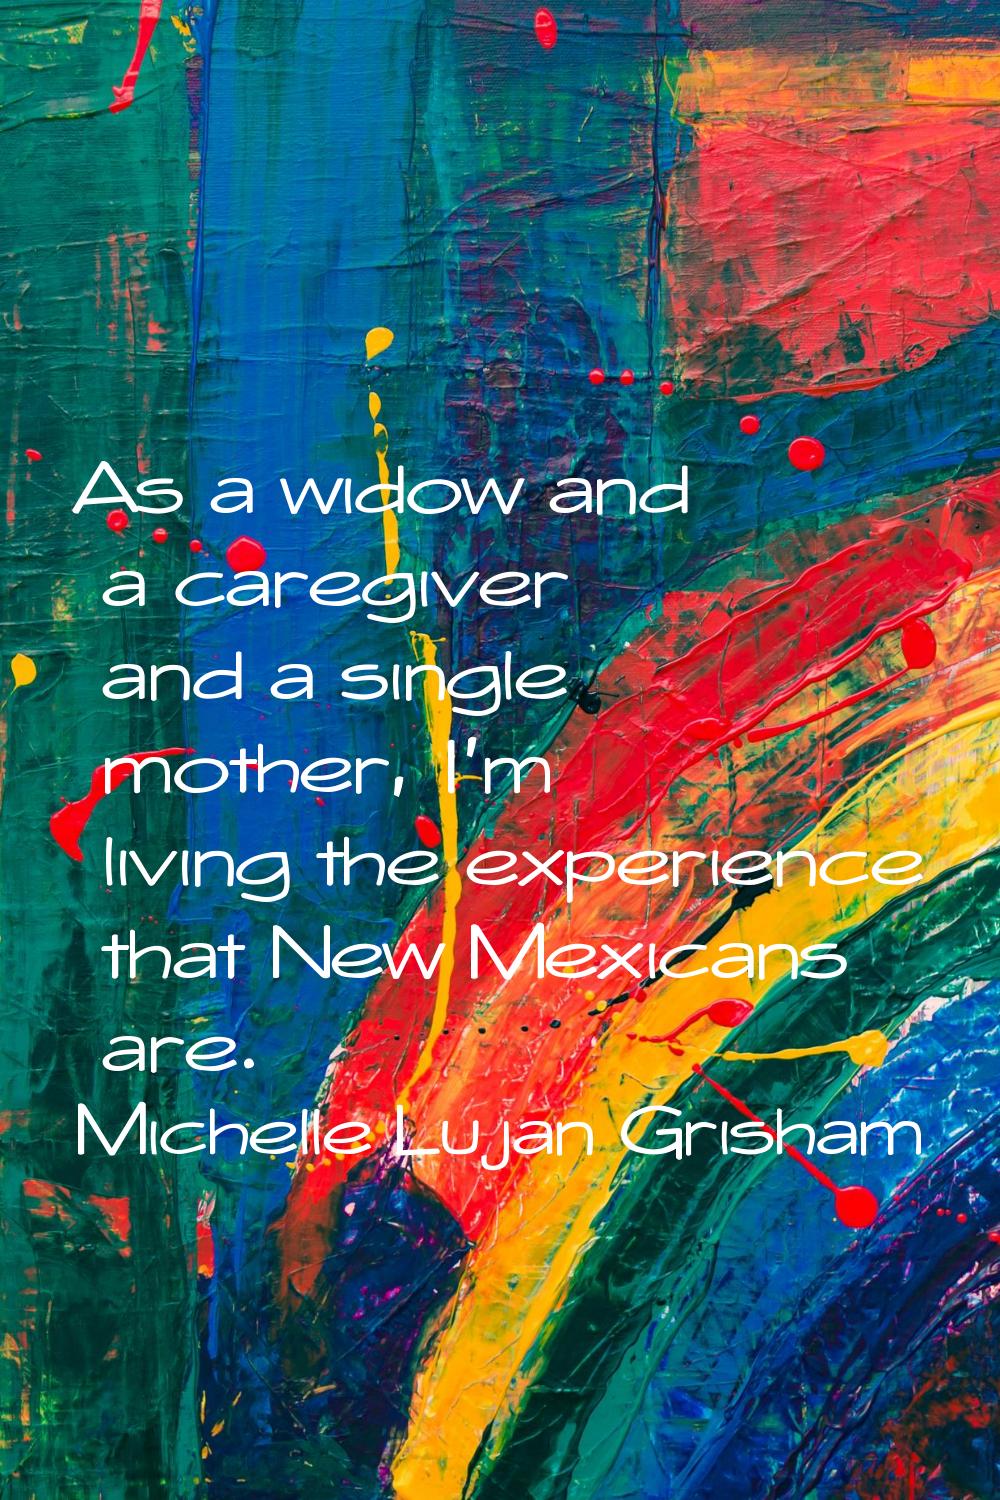 As a widow and a caregiver and a single mother, I'm living the experience that New Mexicans are.